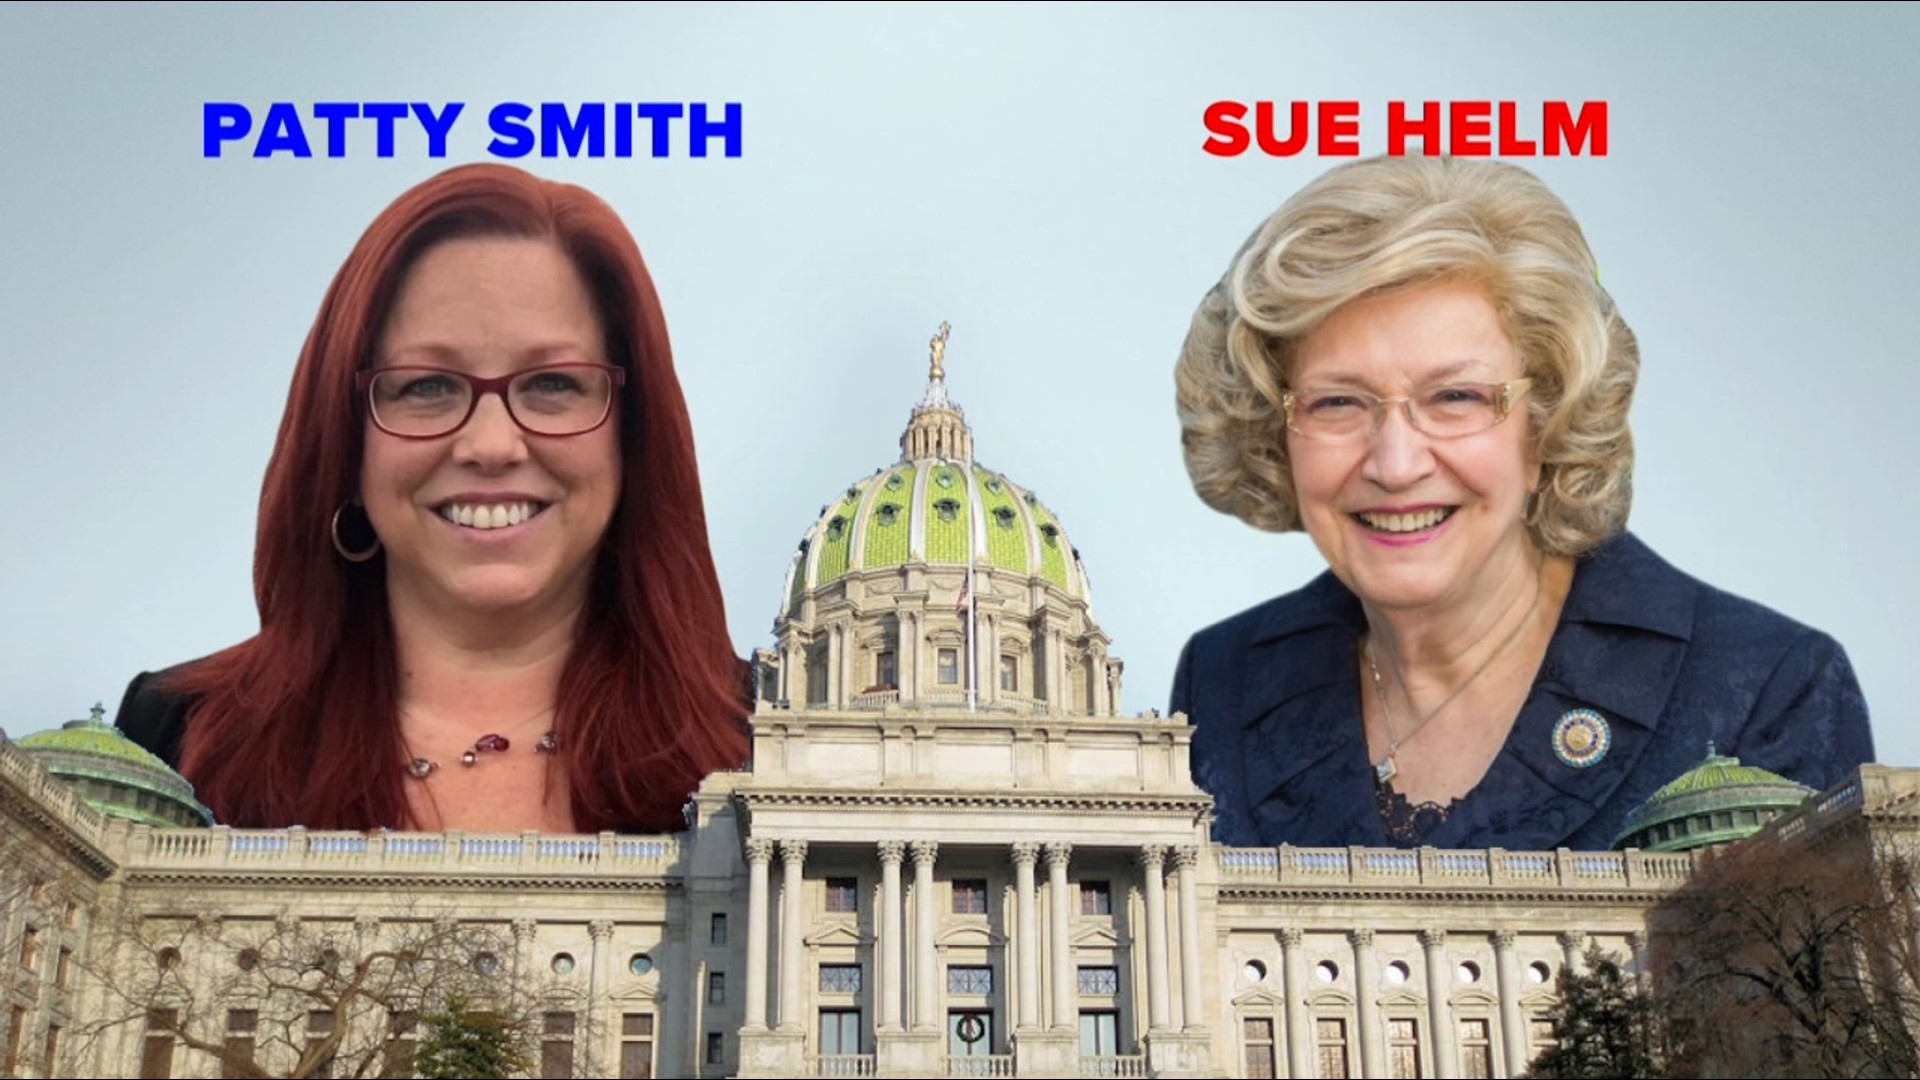 Helm, a Republican, has served in the State House covering portions of Dauphin and Lebanon Counties since 2007. Smith lost her election bid to Helm in 2018.